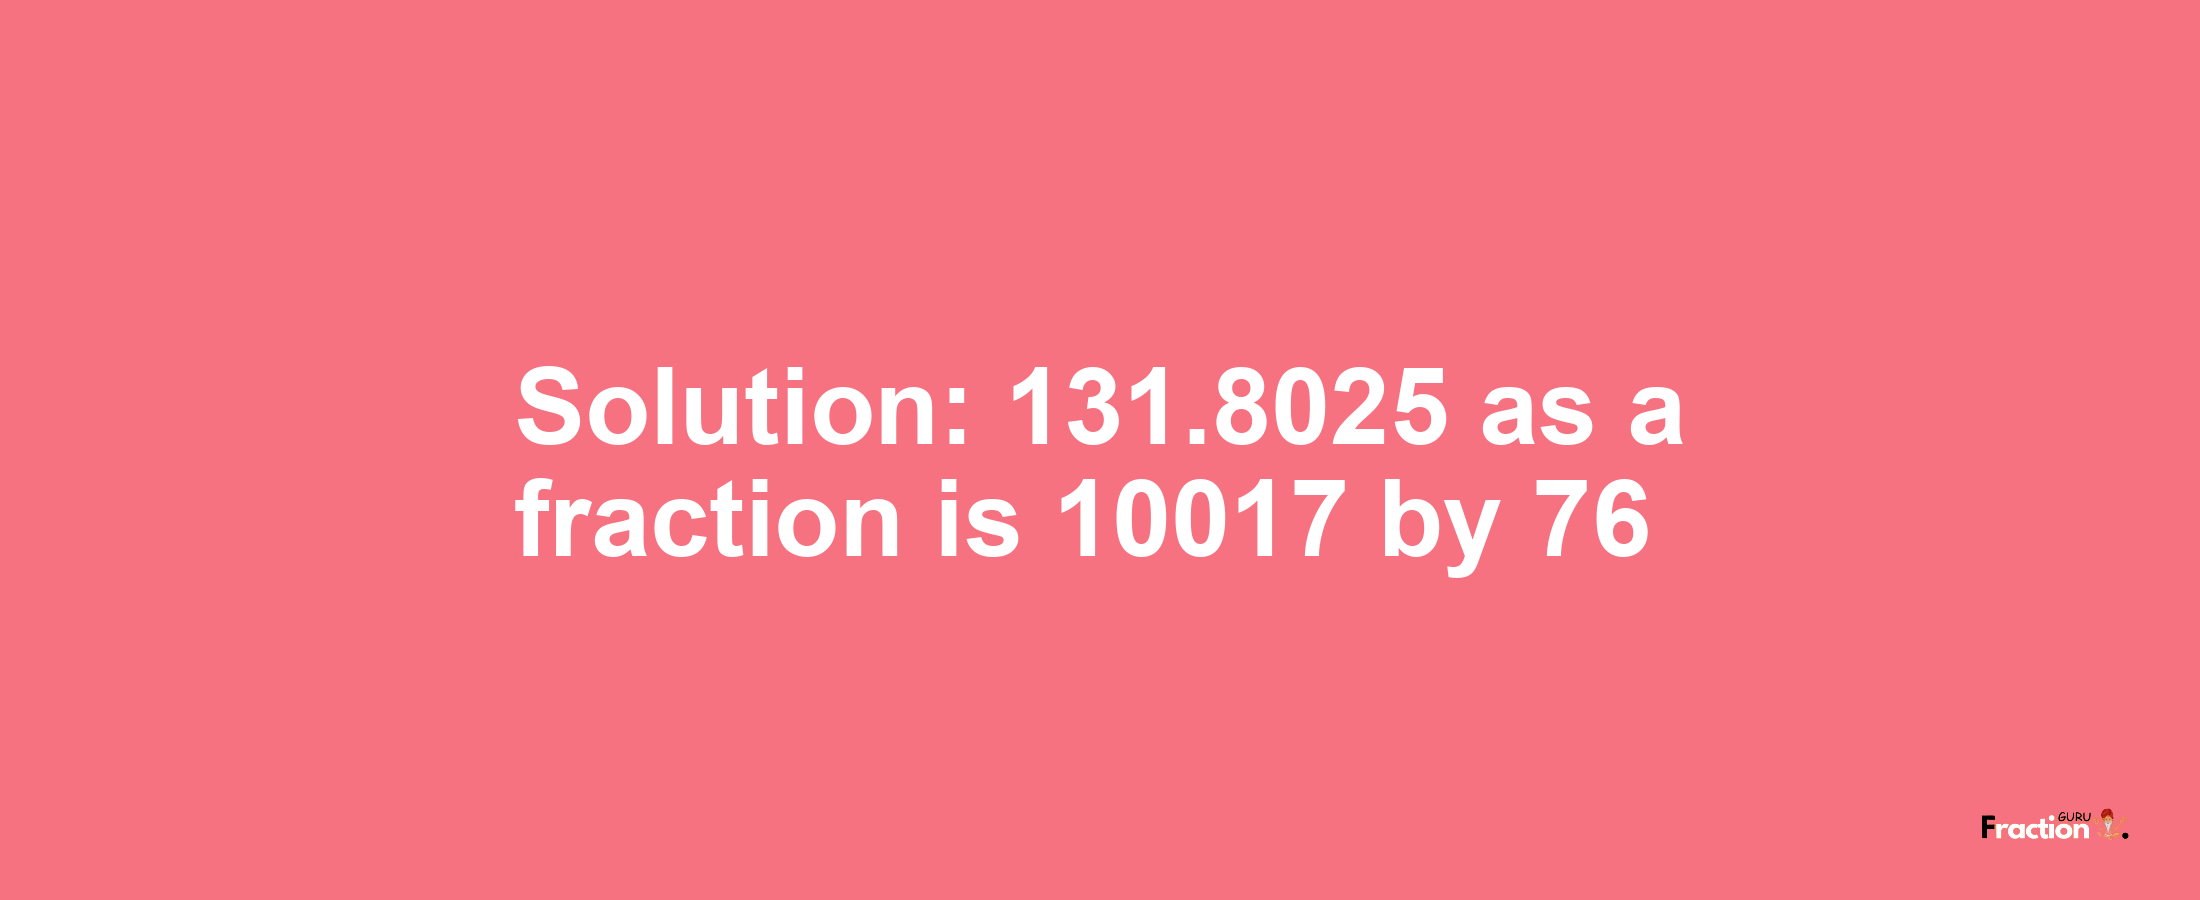 Solution:131.8025 as a fraction is 10017/76